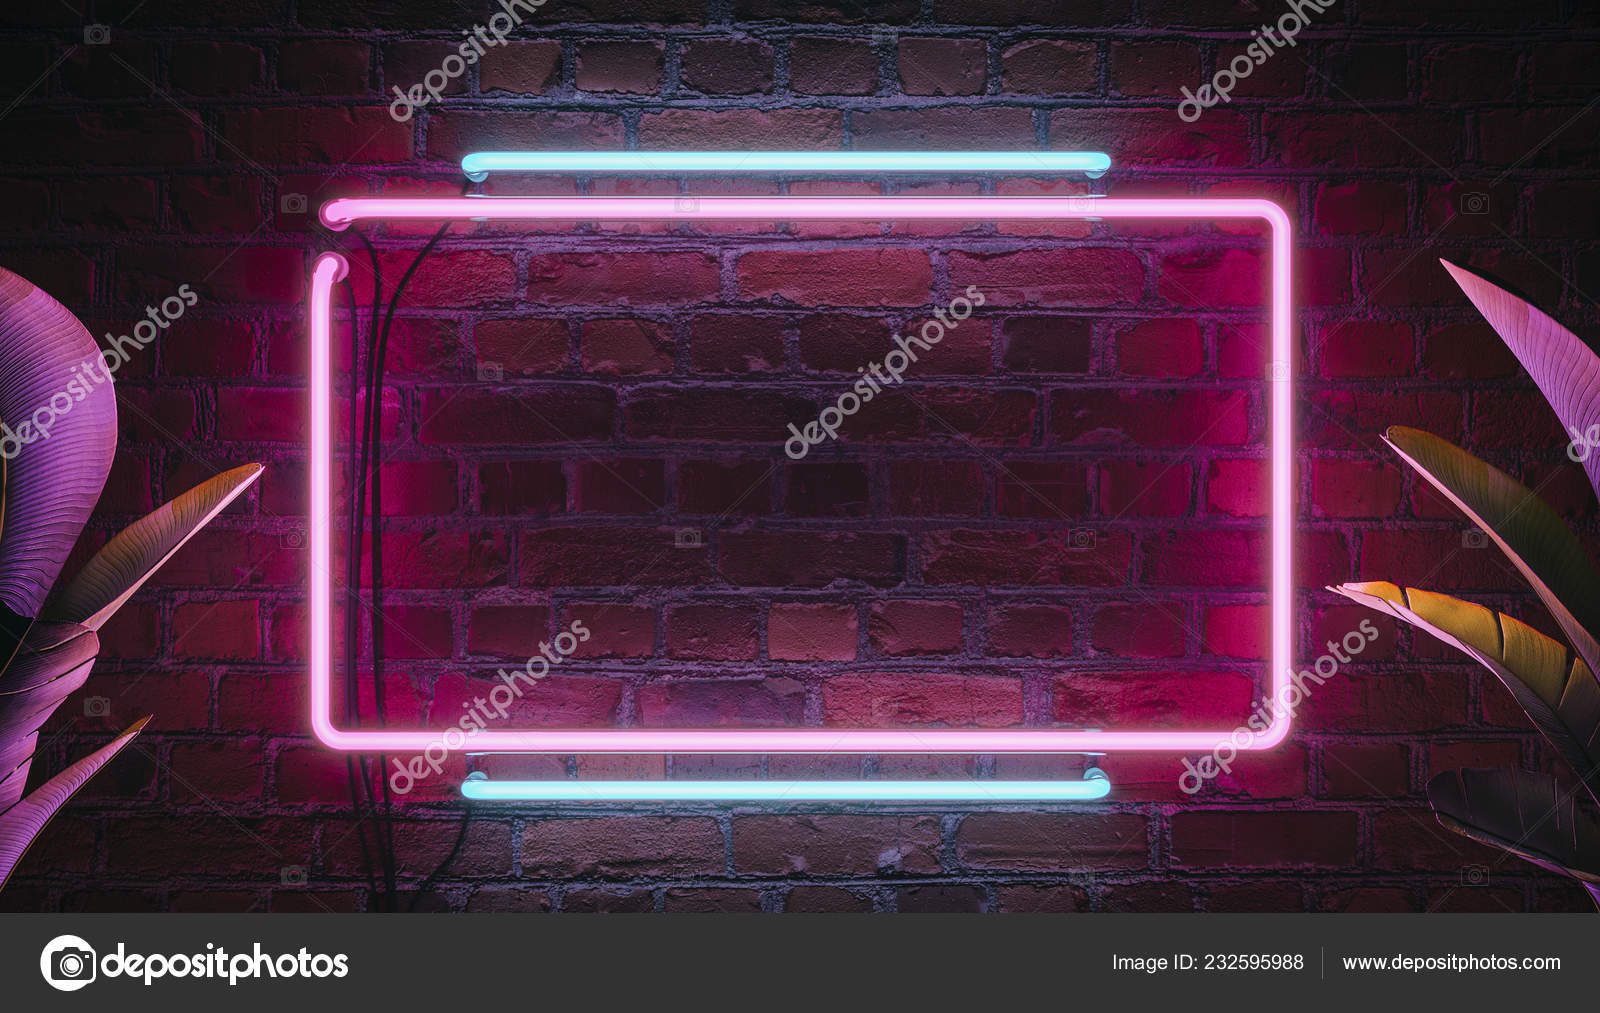 Neon light sign board background. 3d modern illustration. Neon elements and  plants. Stock Photo by ©bestpixels 232595988